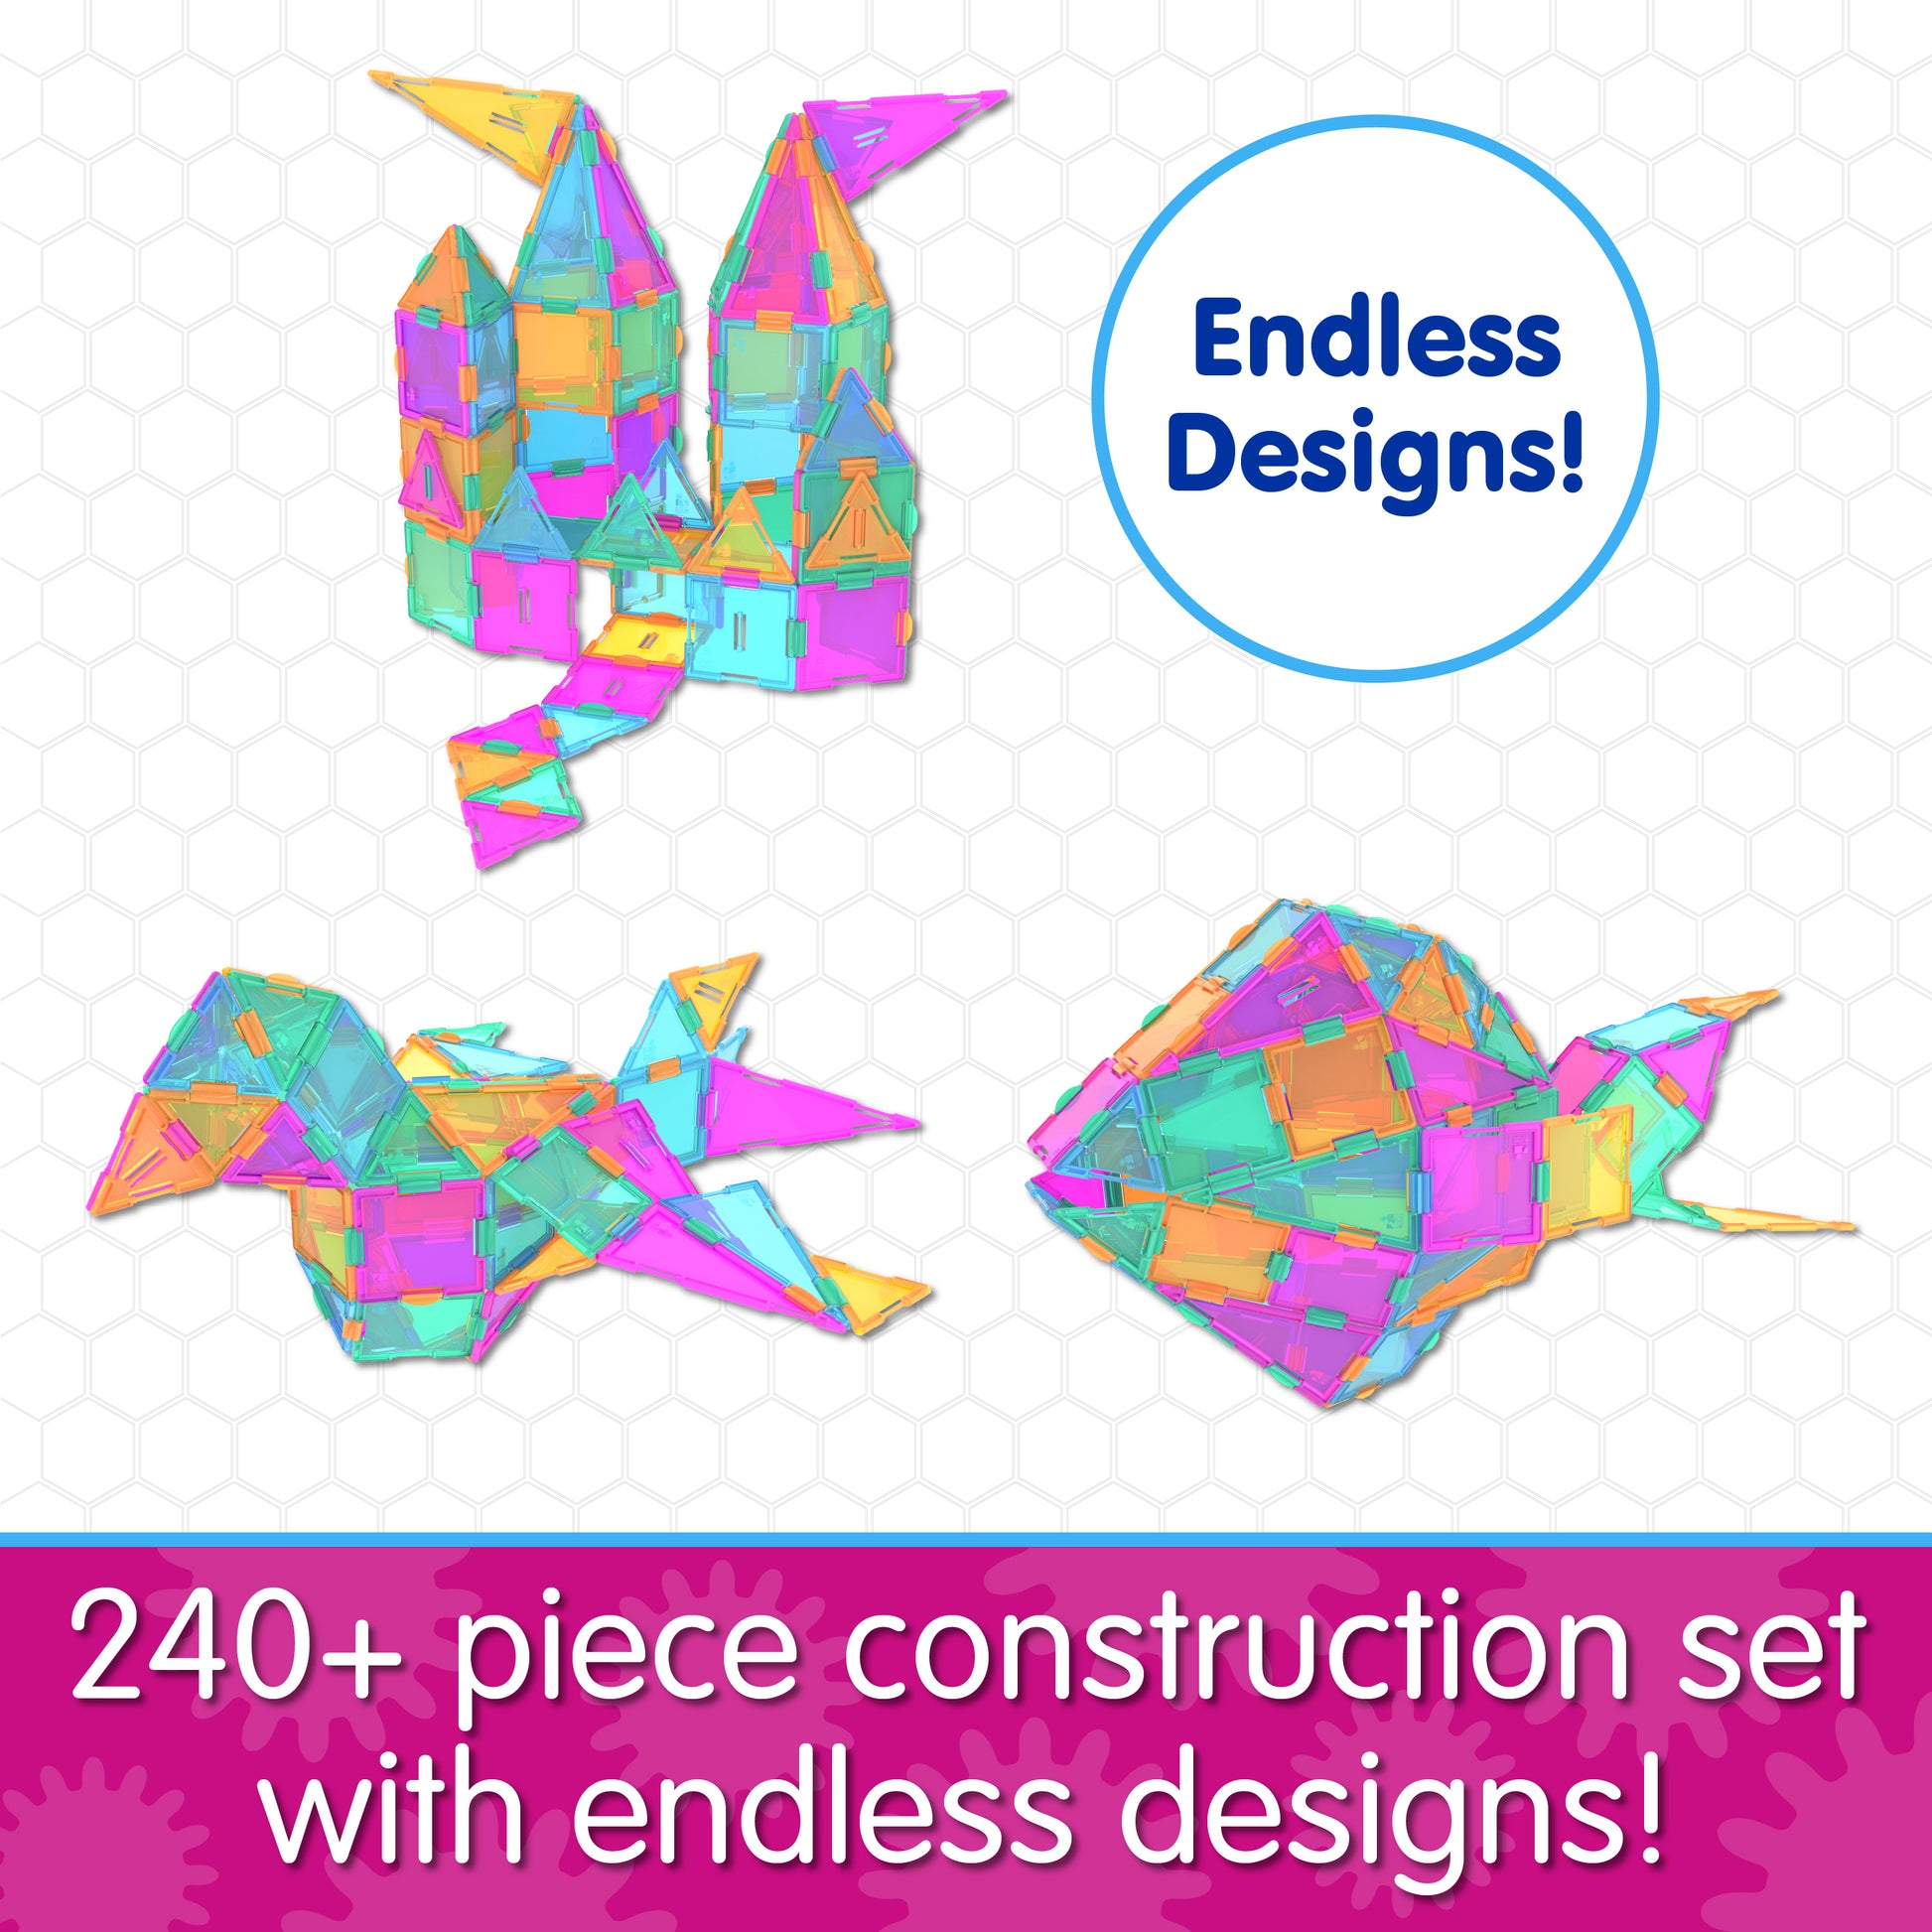 Infographic about Techno Tiles that says, "240+ piece construction set with endless designs!"